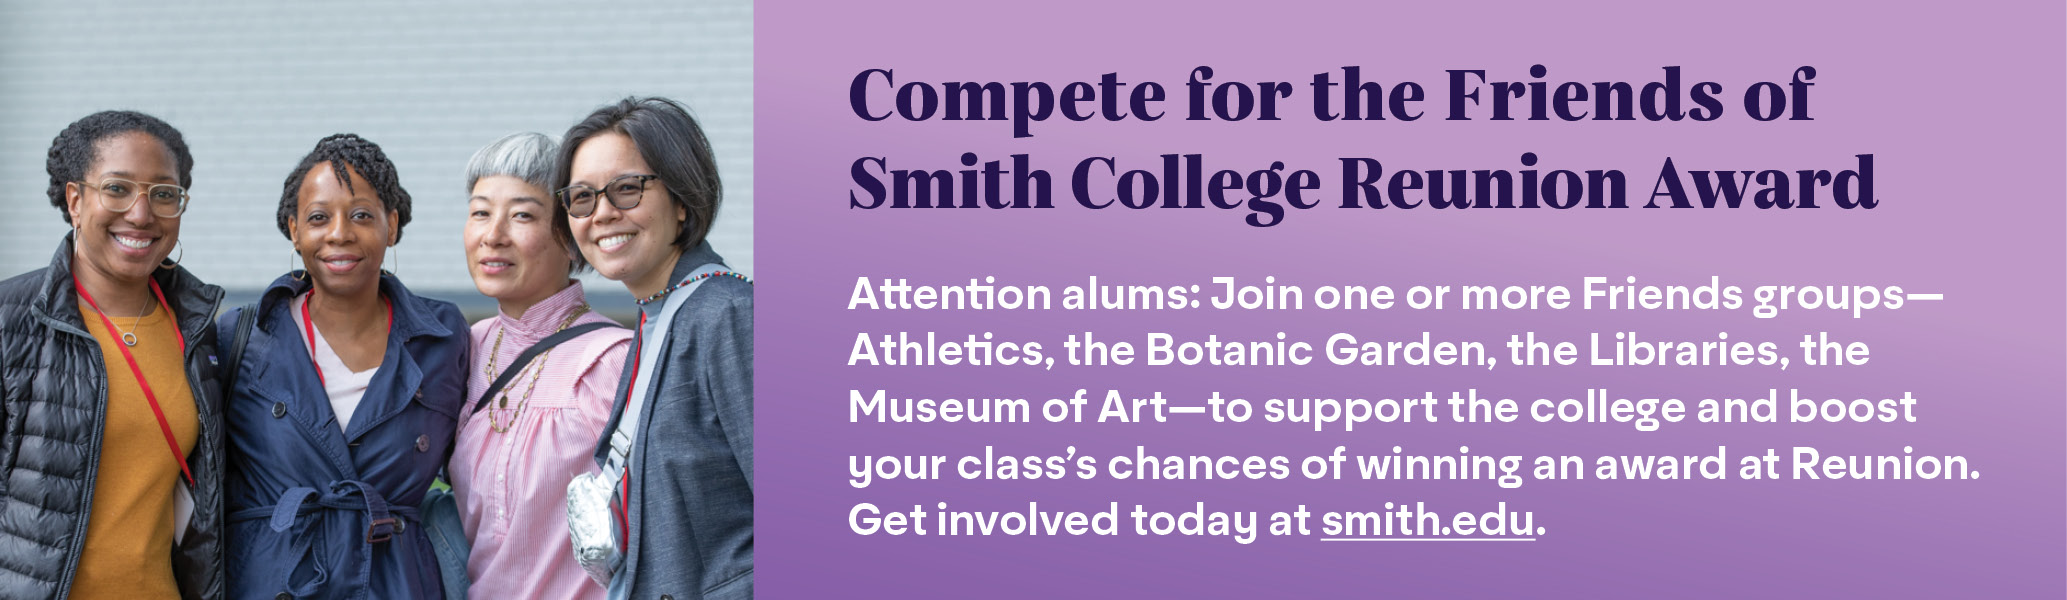 A graphic with four women promoting Smith College's Friends groups and annual Reunion.